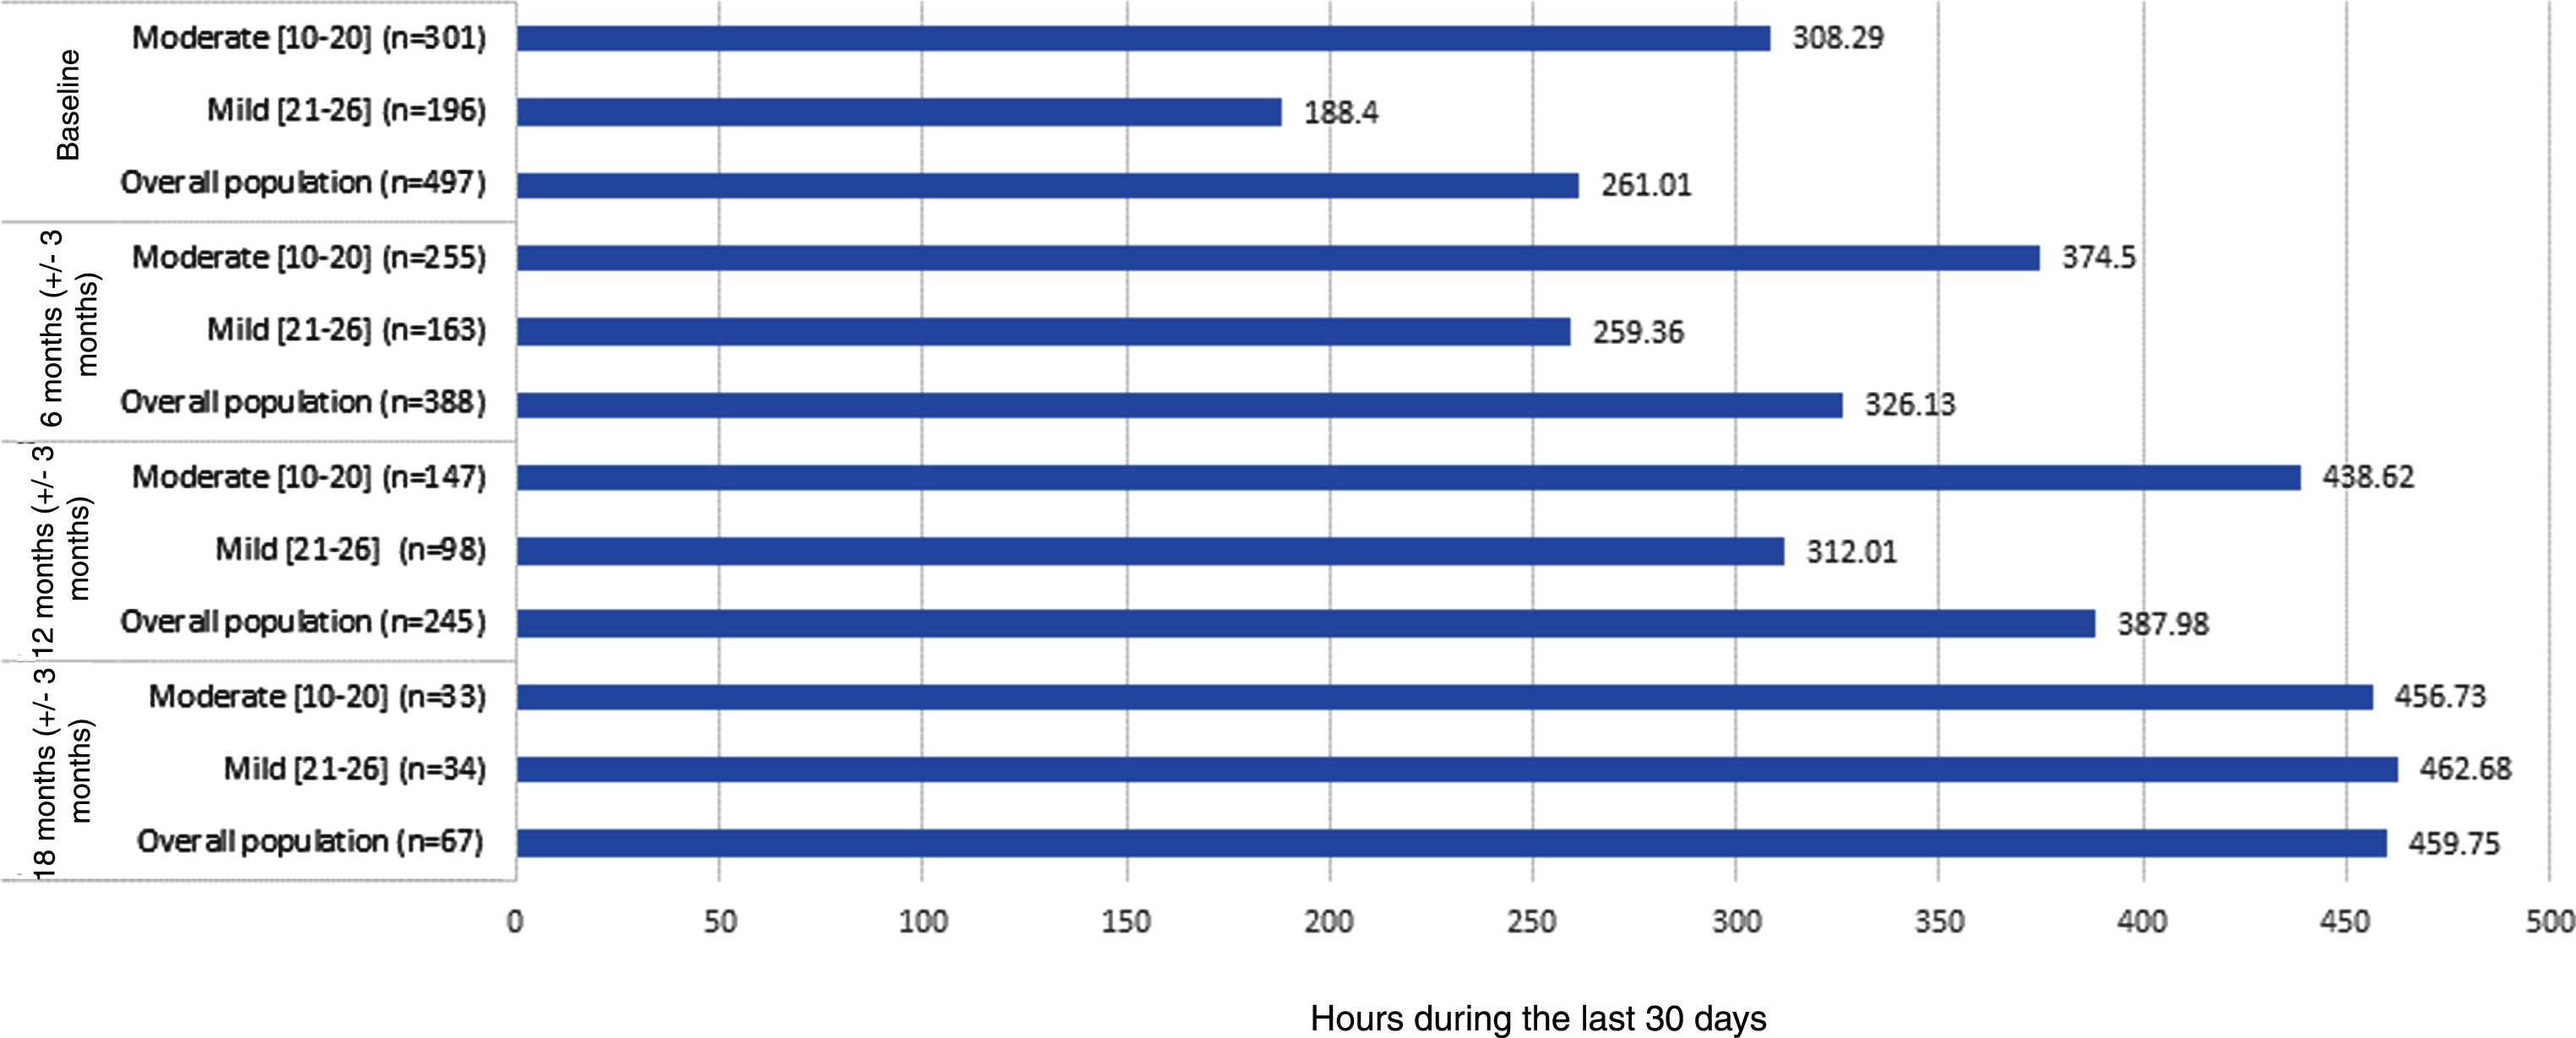 Caregiver time and productivity loss based on RUD questionnaire.